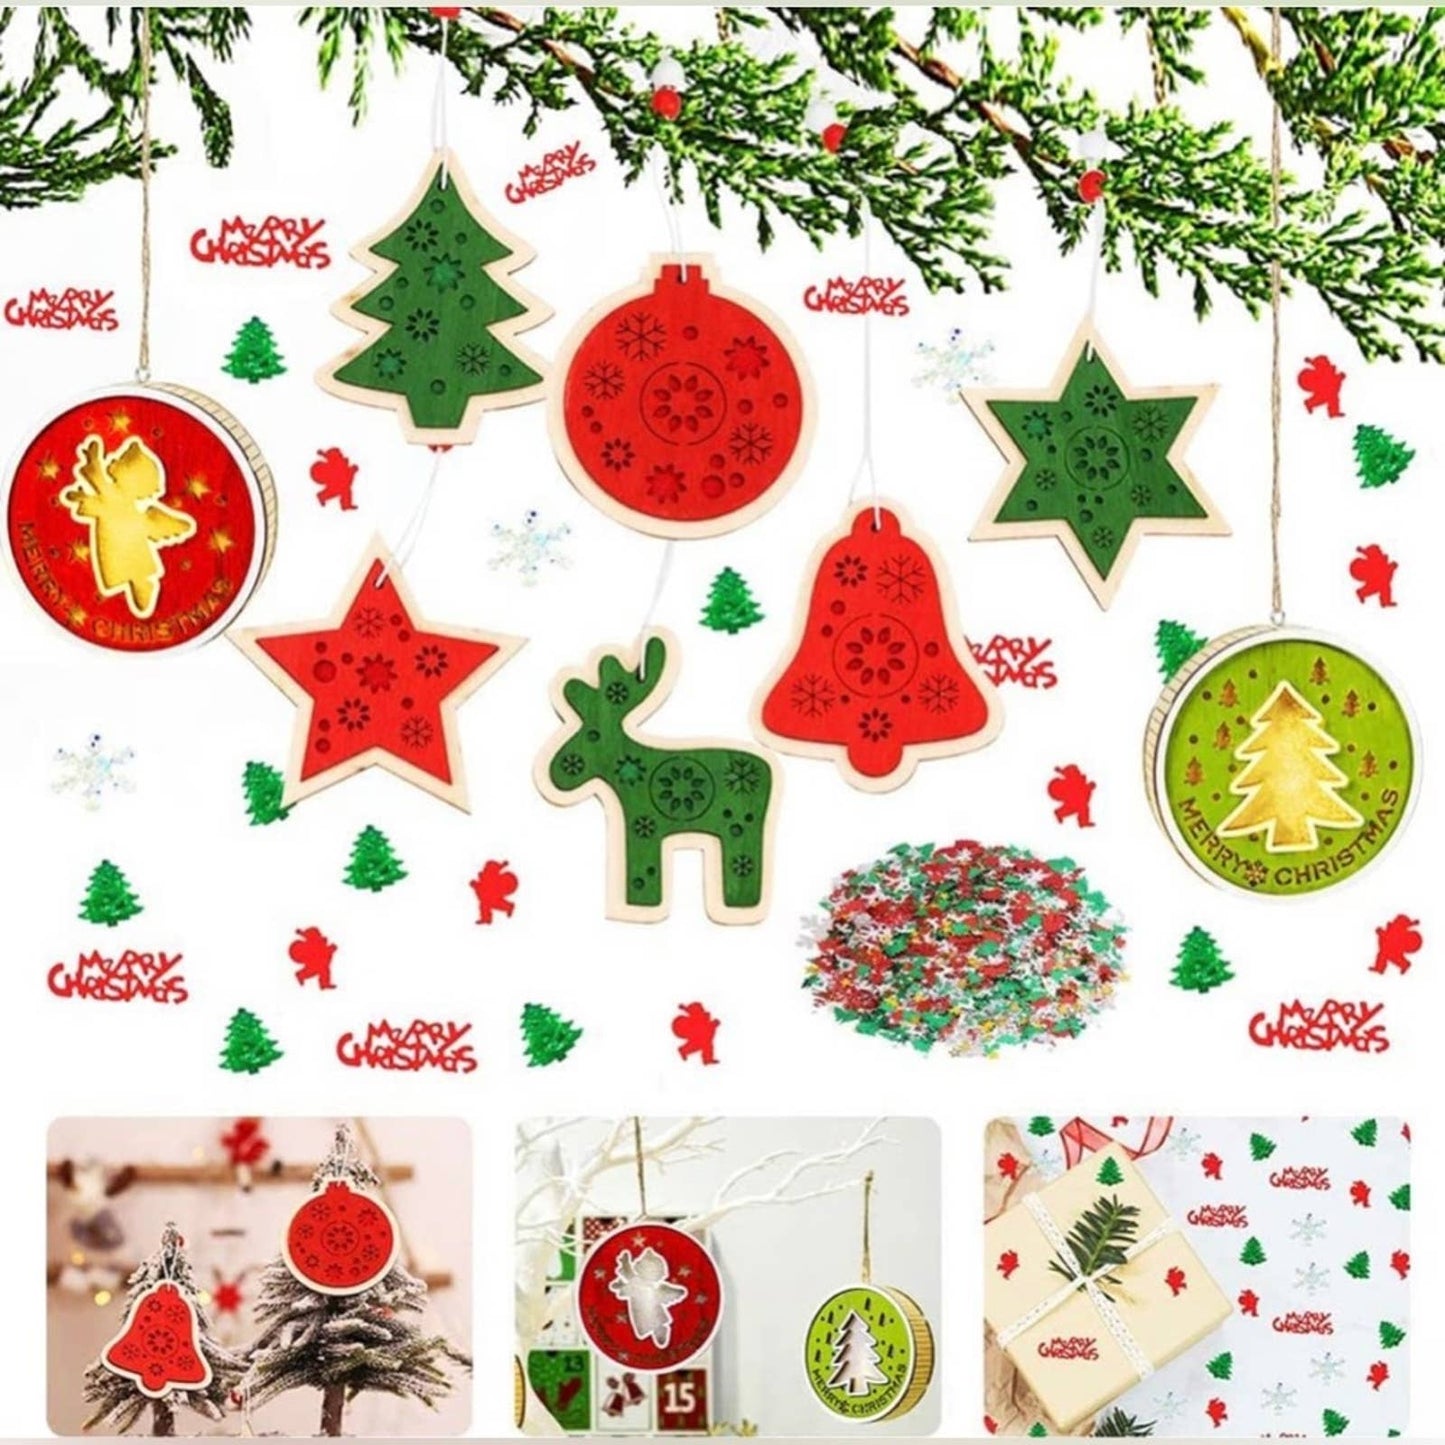 TOBENUB Christmas Decorations, Wooden Christmas Ornaments for Hanging Decoration